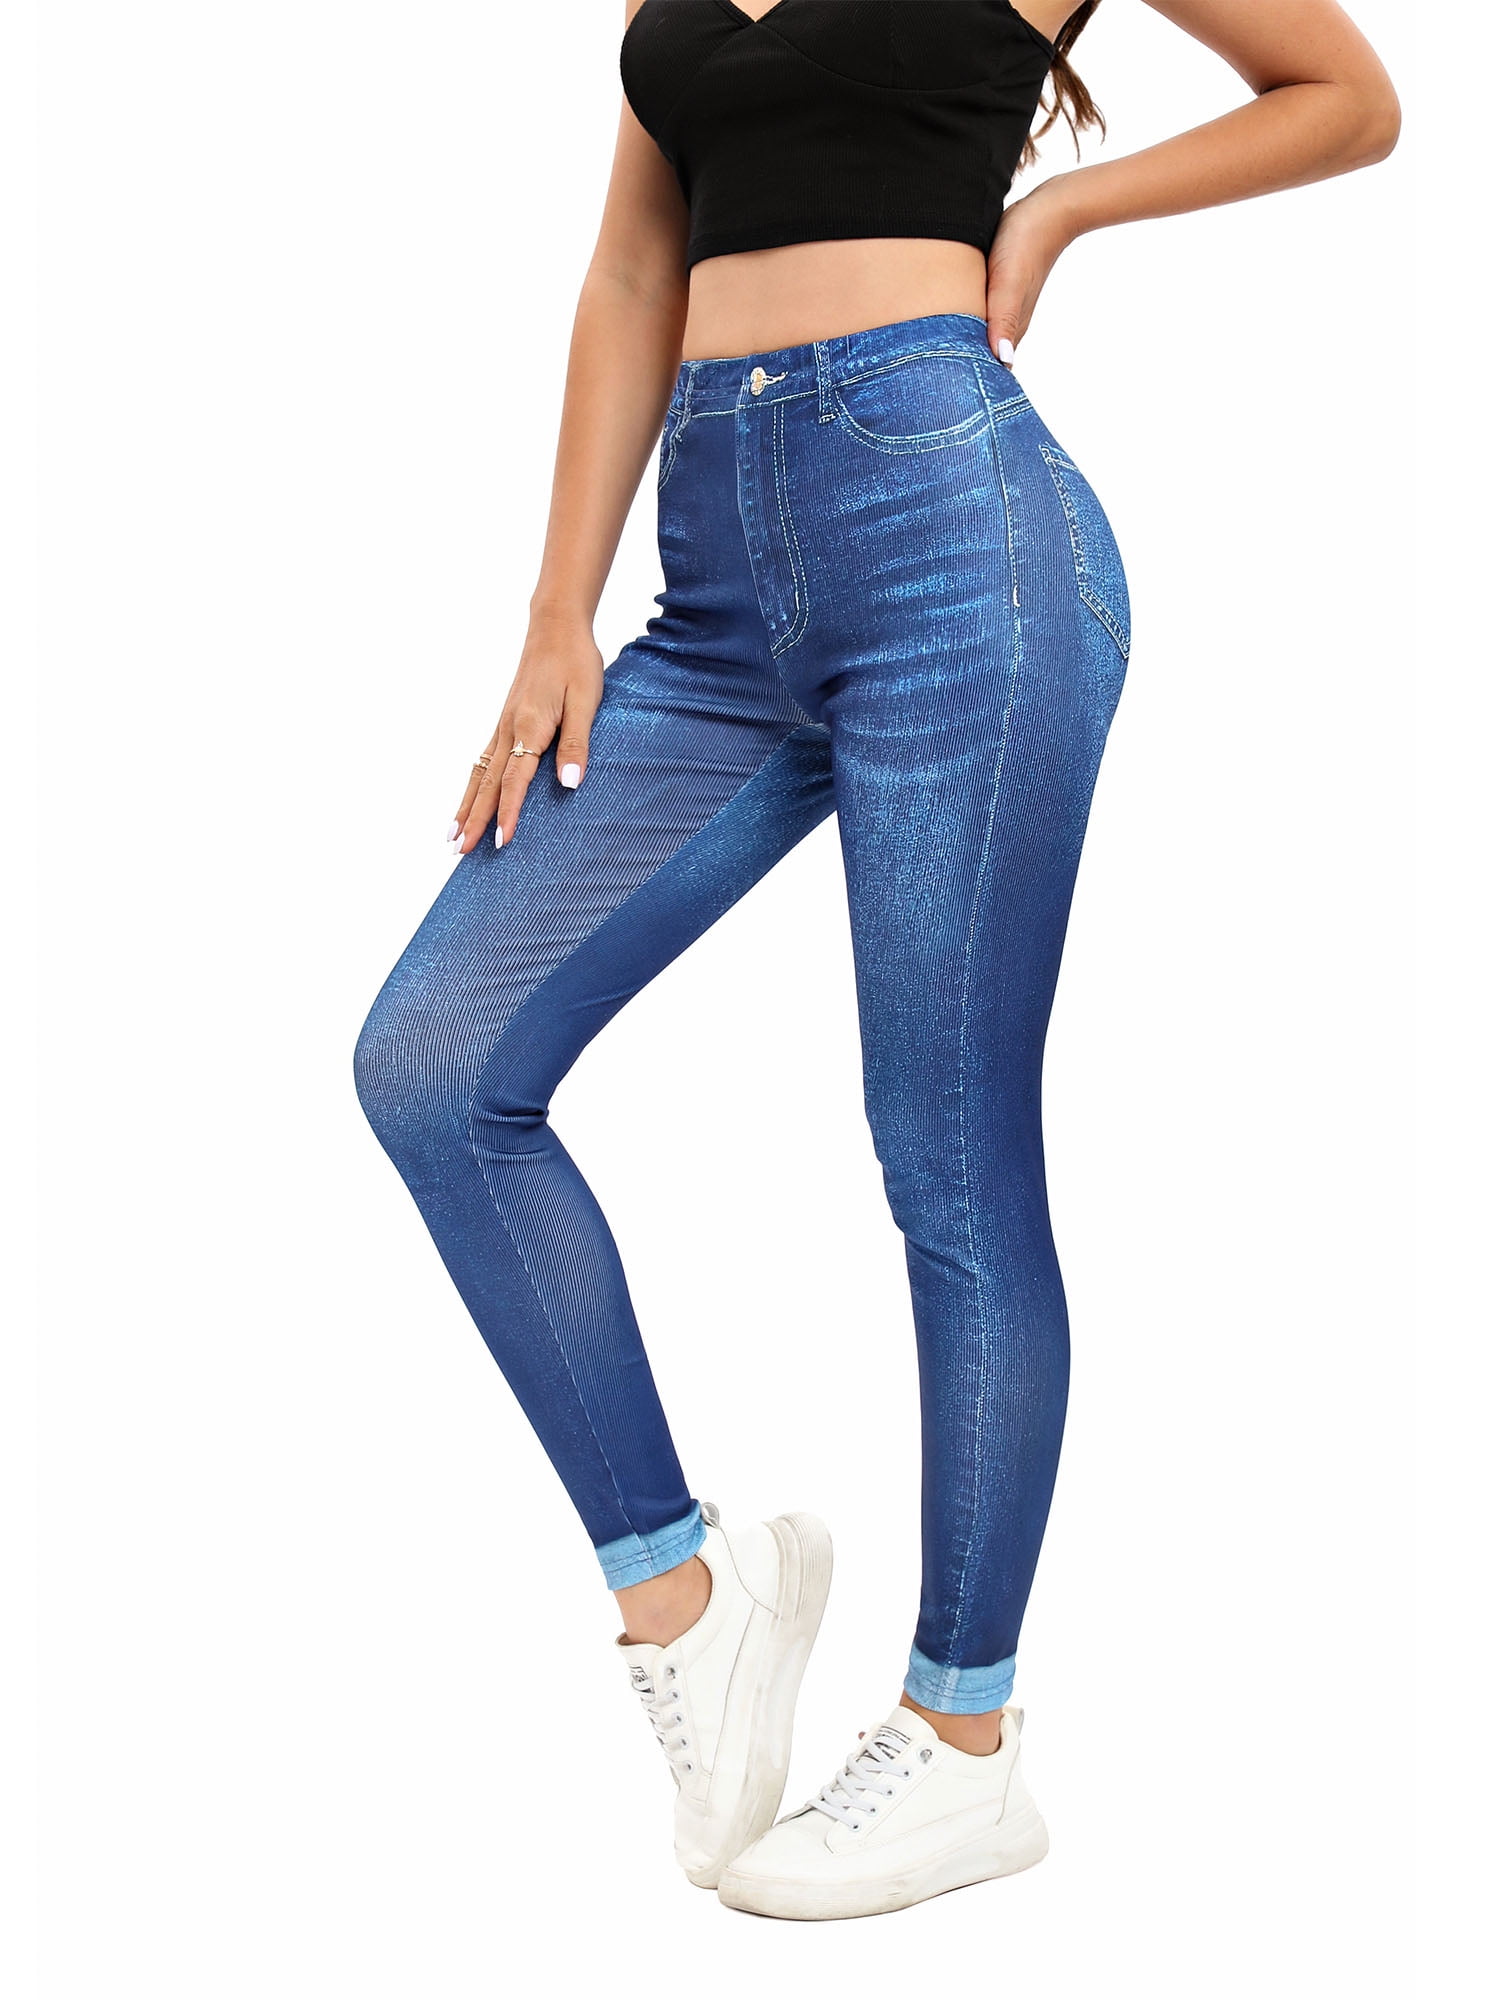 Frontwalk Jean Leggings for Women Printed Denim High Waisted Yoga Pants  Stretch Jean Look Jeggings Tights Blue-B XS